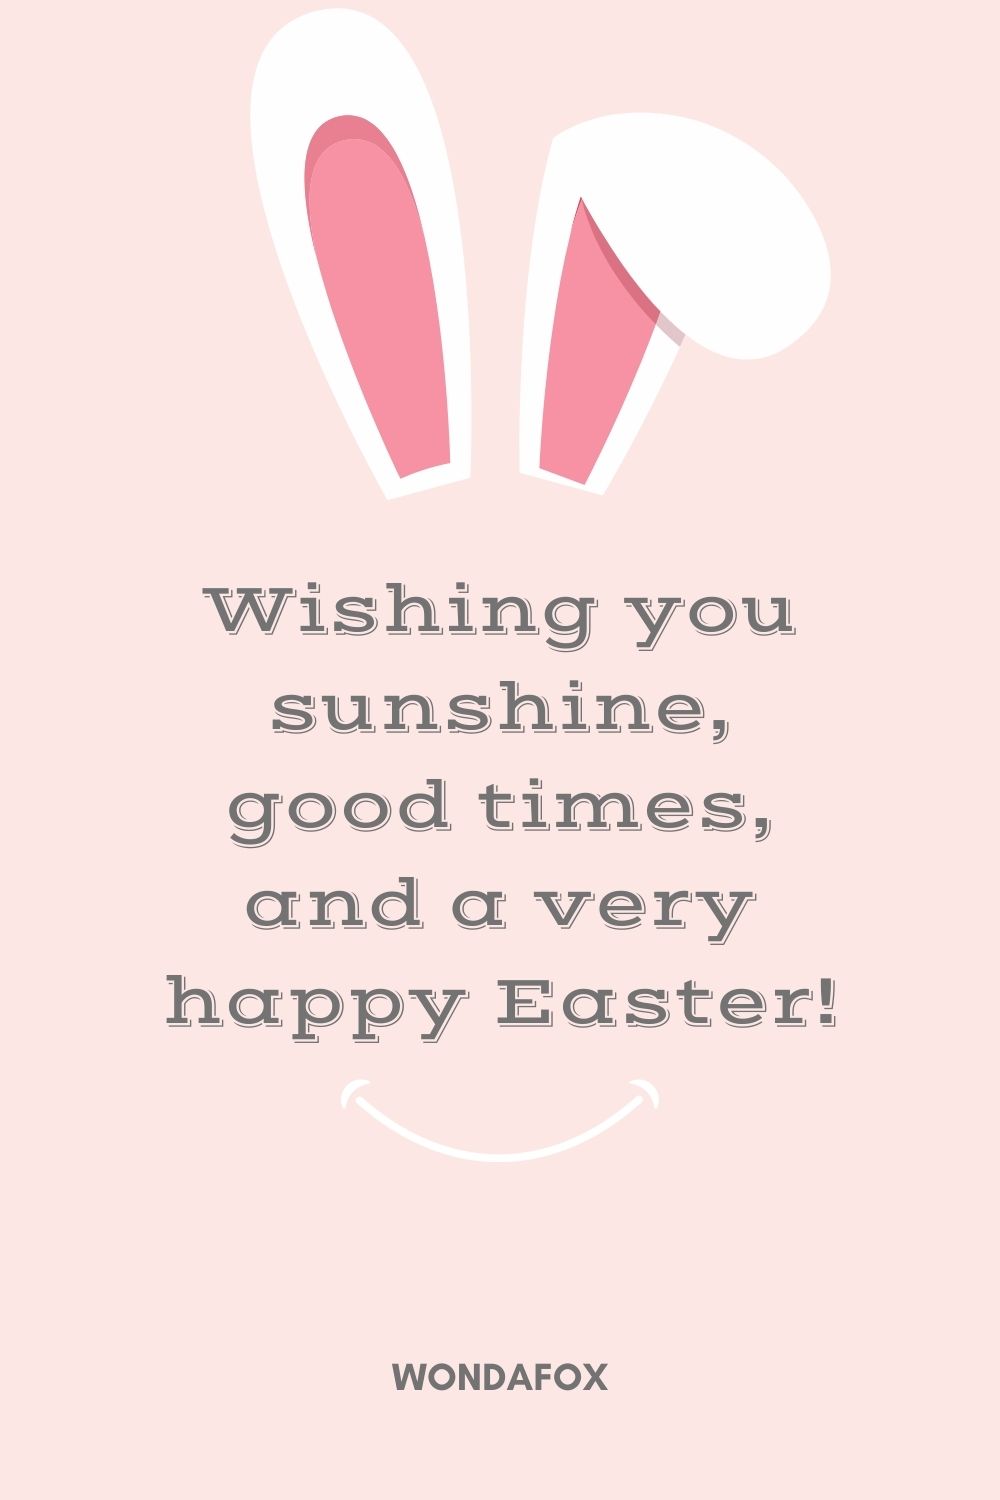 Wishing you sunshine, good times, and a very happy Easter!